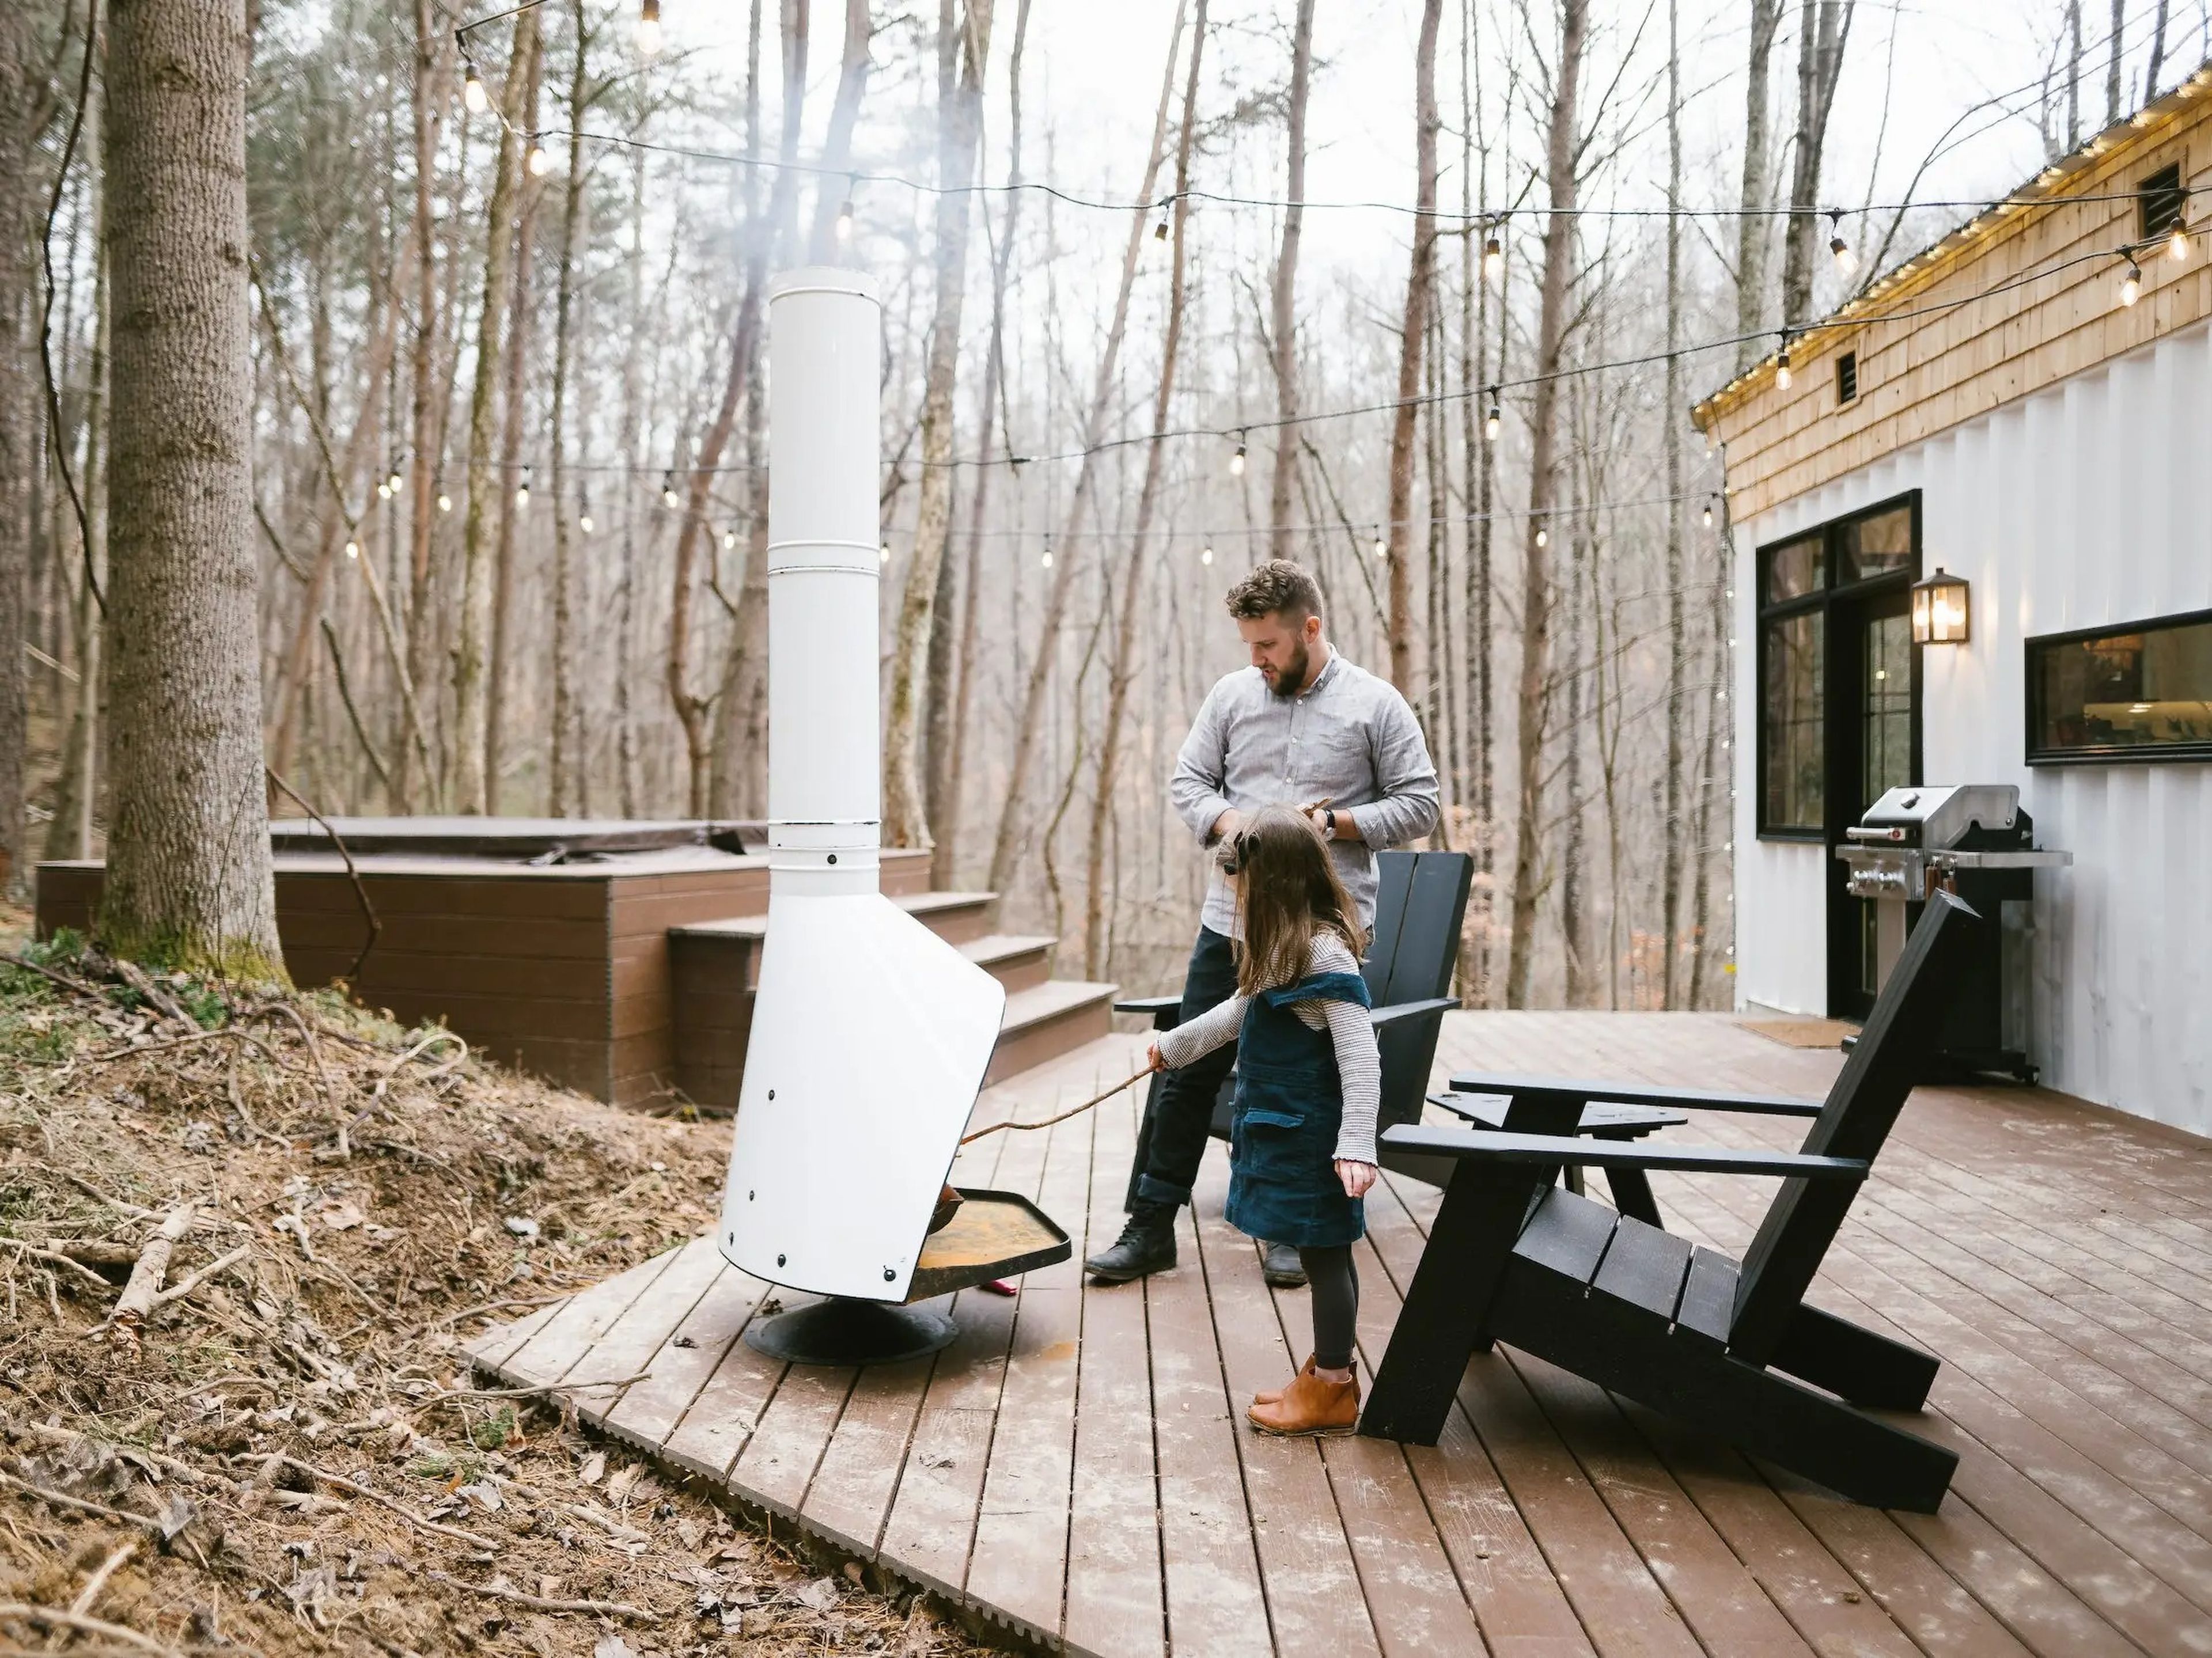 An adult and child near an outdoor fire pit next to a shipping container home.